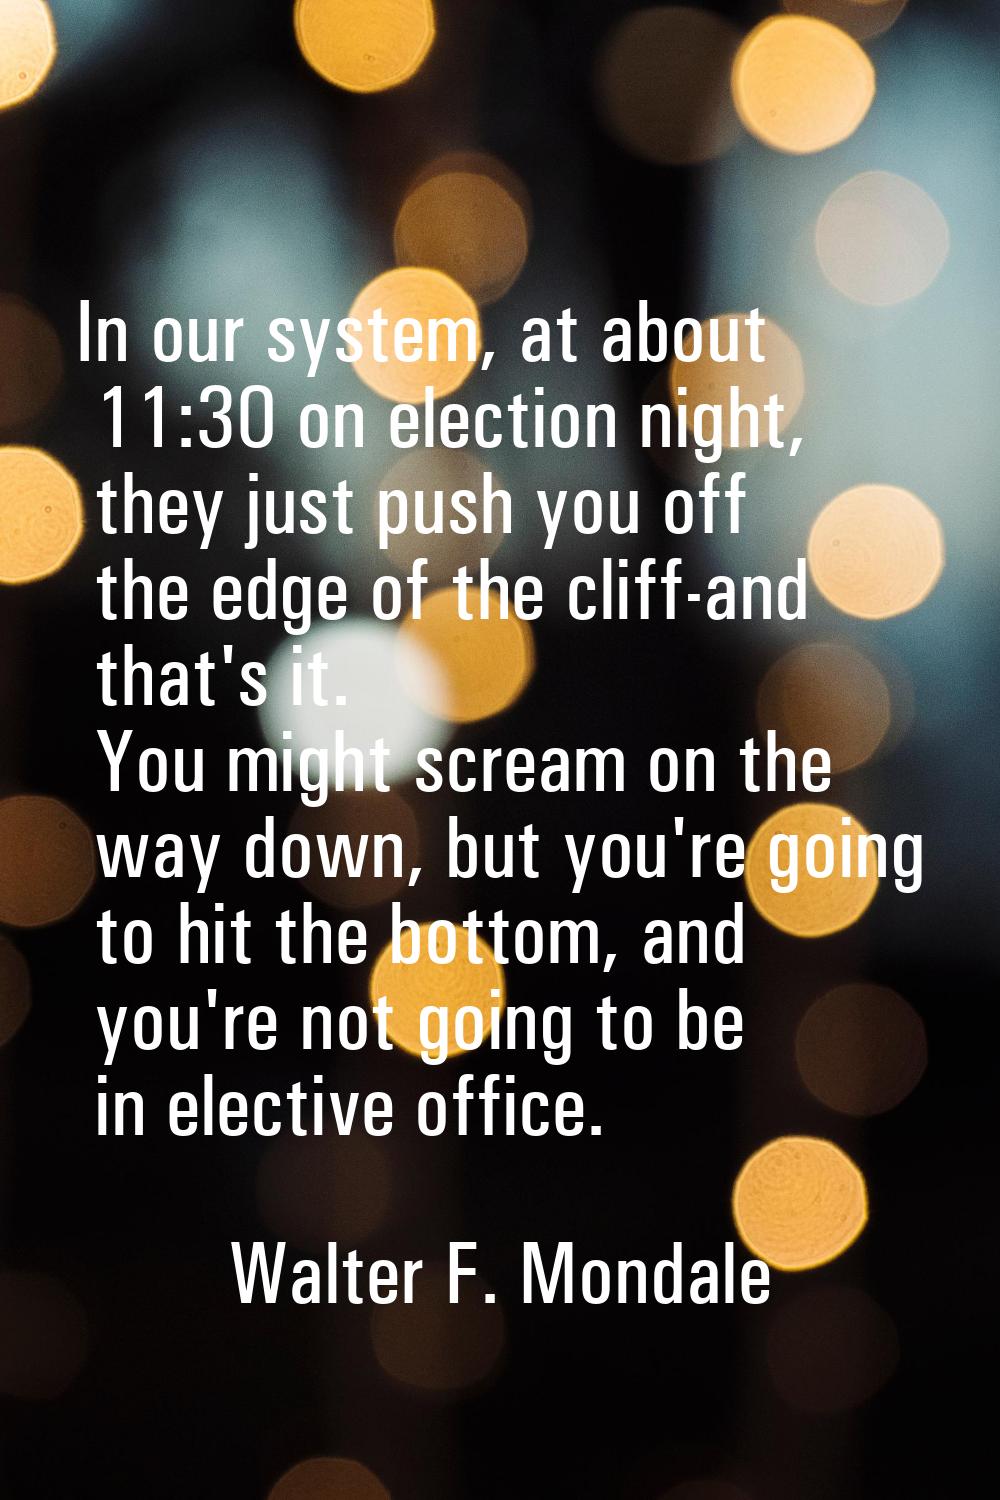 In our system, at about 11:30 on election night, they just push you off the edge of the cliff-and t